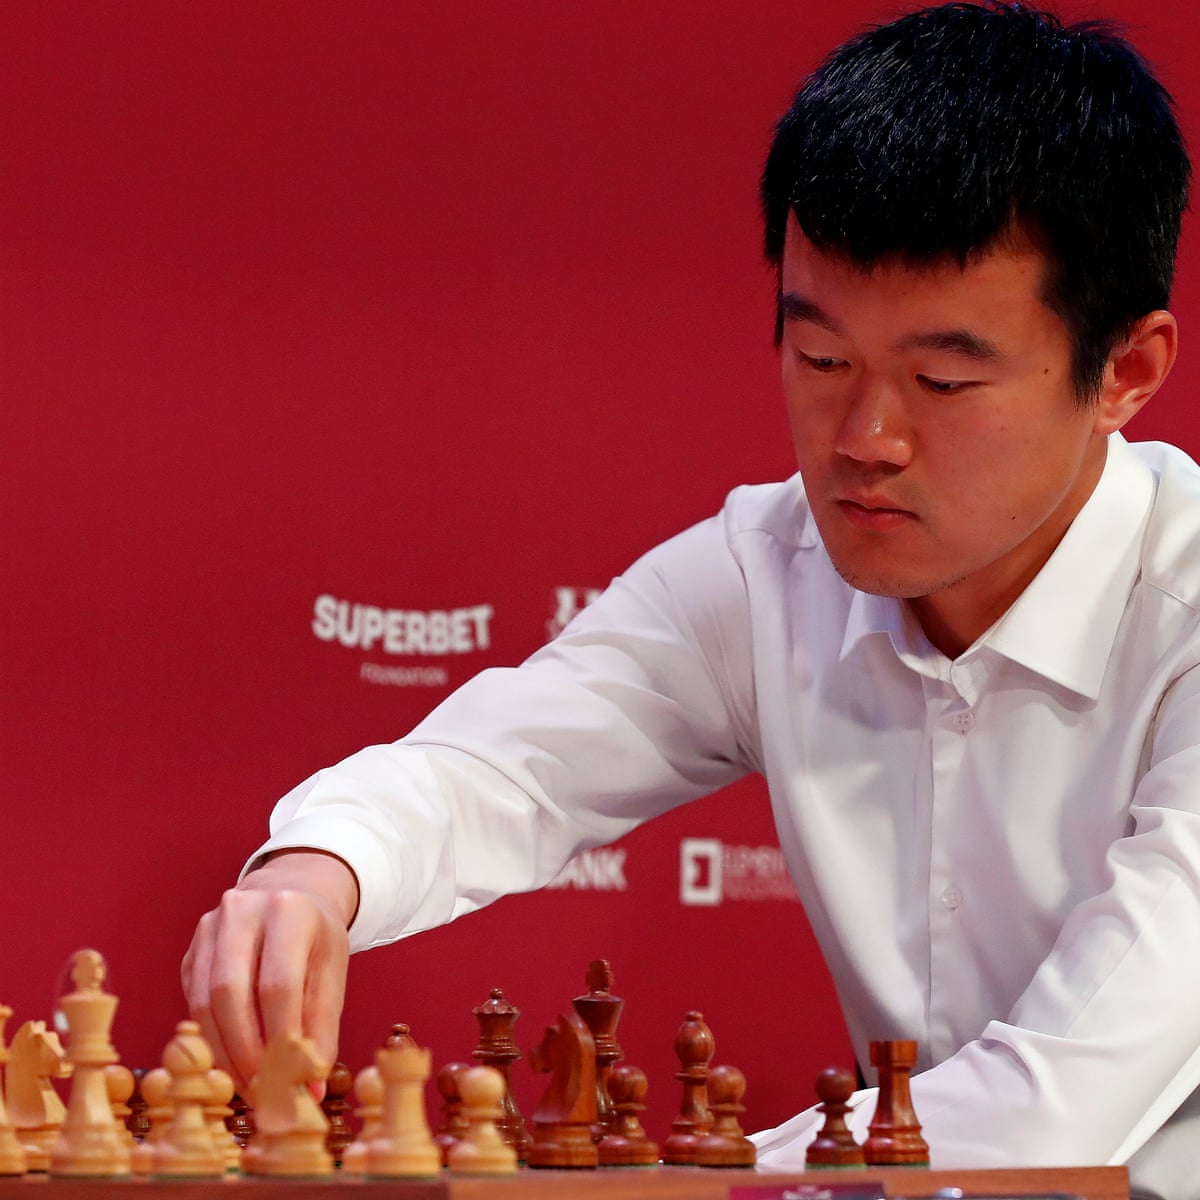 Chess: Doubt cast over Ding Liren's planned return to action at